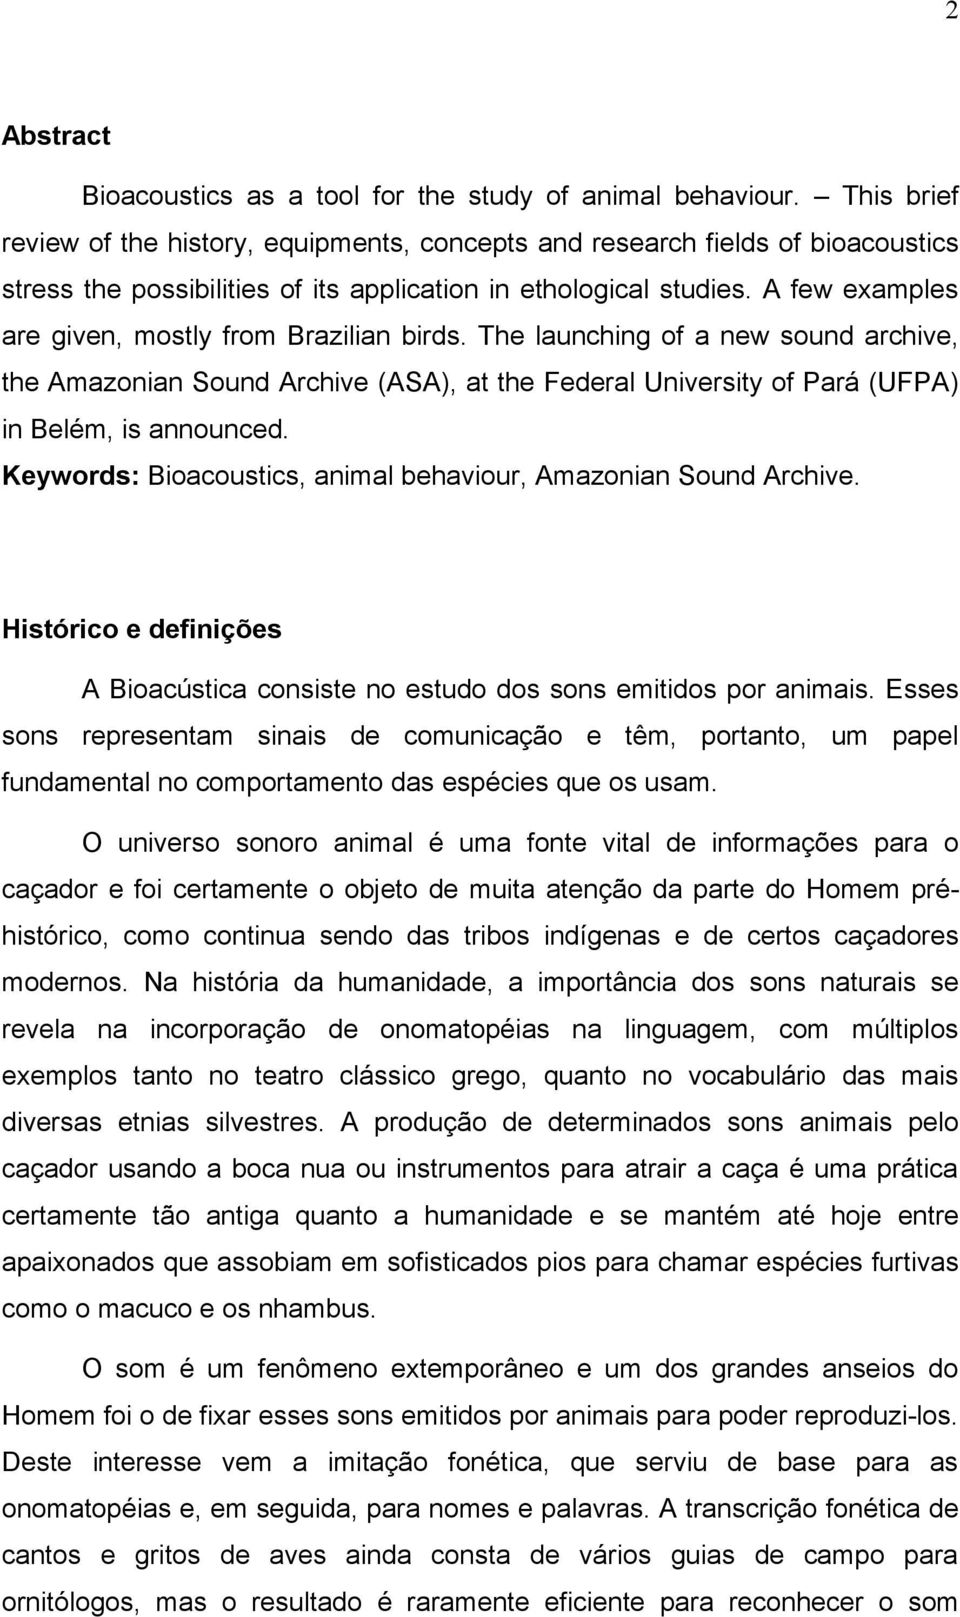 A few examples are given, mostly from Brazilian birds. The launching of a new sound archive, the Amazonian Sound Archive (ASA), at the Federal University of Pará (UFPA) in Belém, is announced.